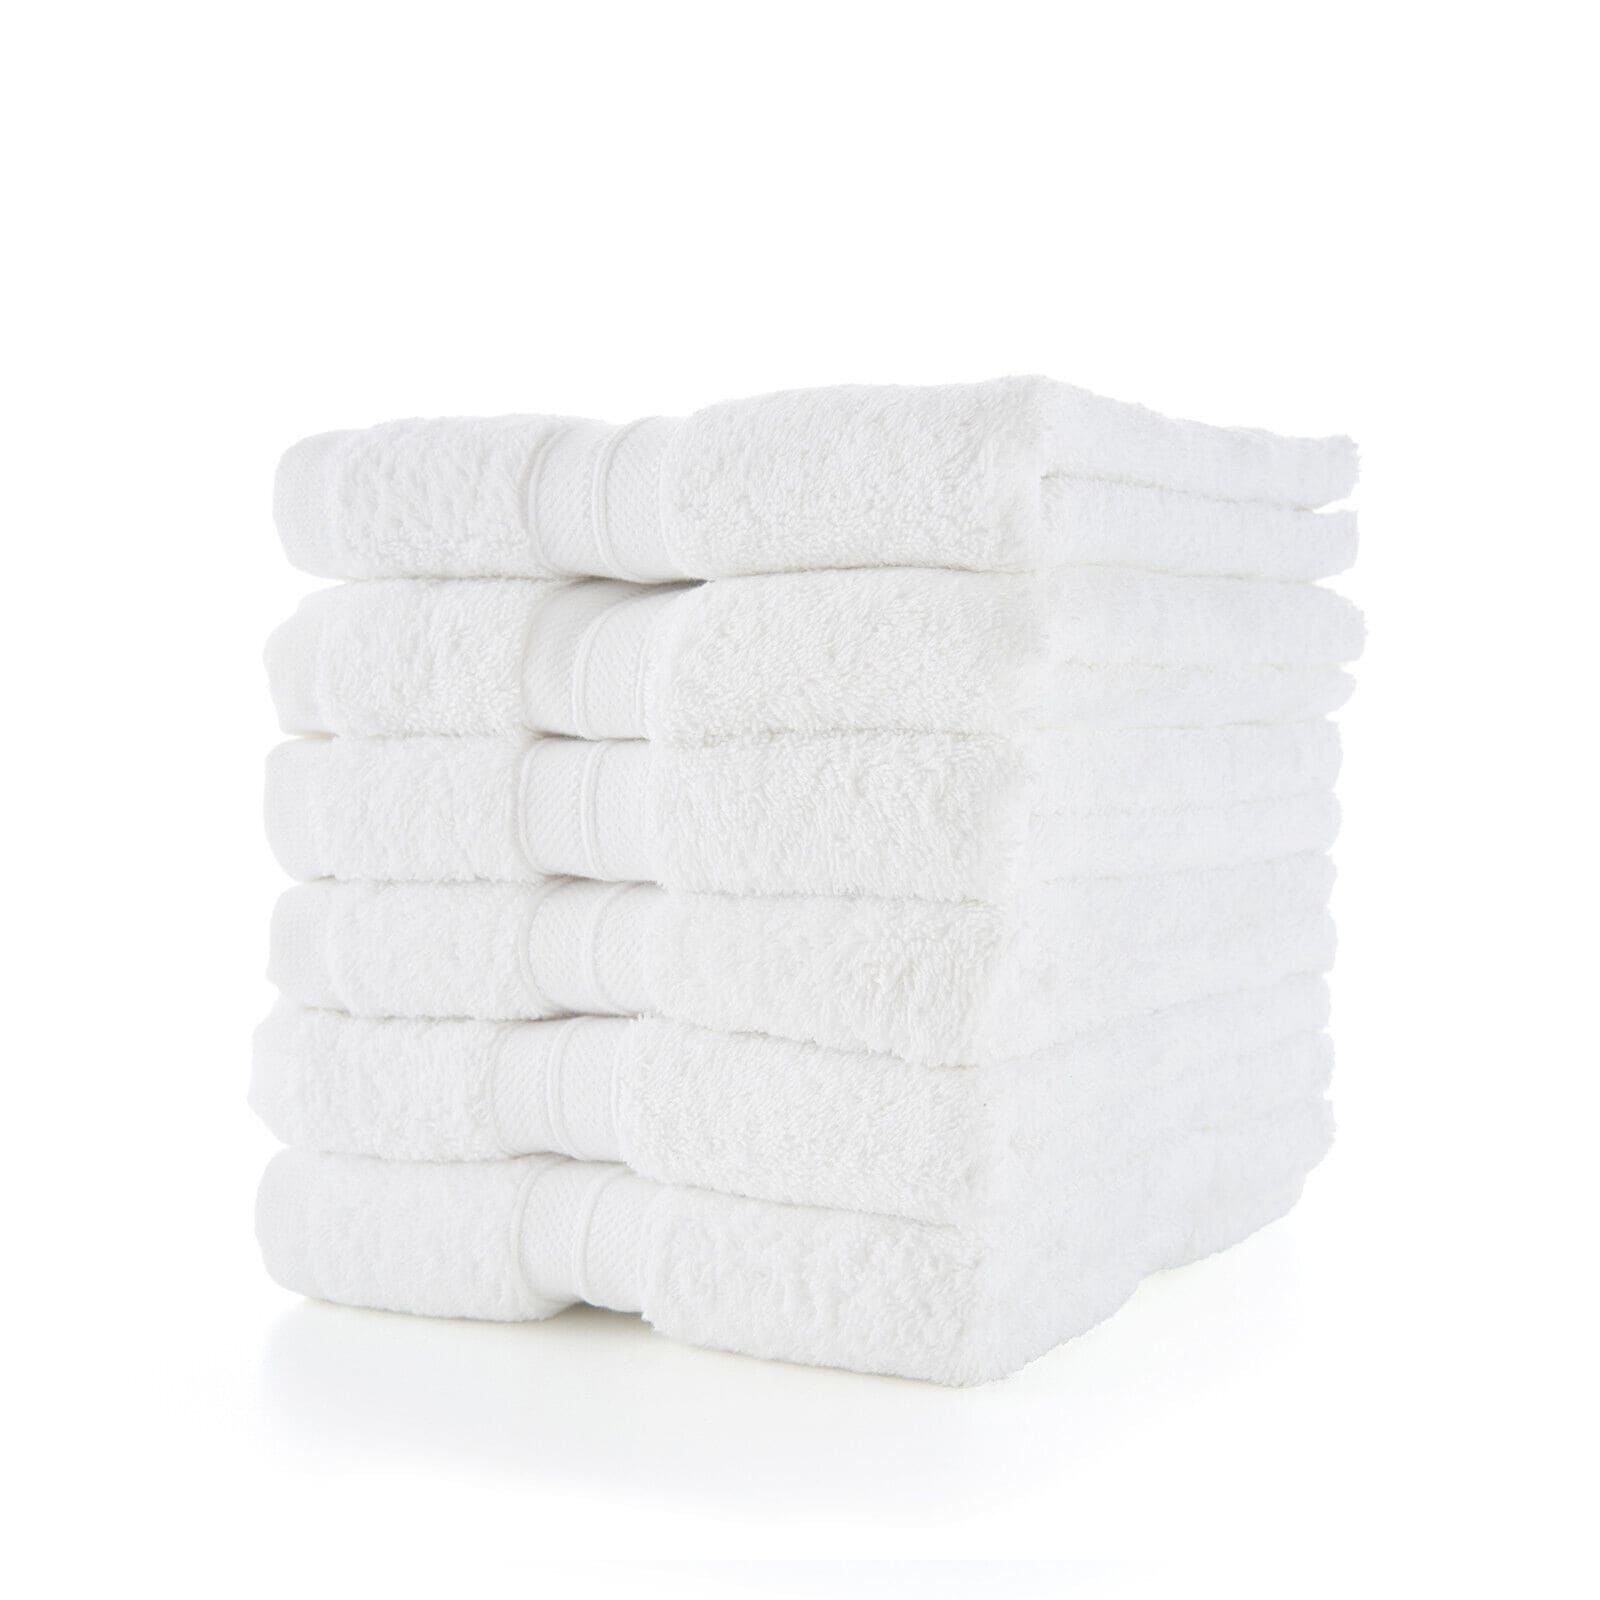 https://ak1.ostkcdn.com/images/products/is/images/direct/071d5c7863b5a59d9c974dde0253e95fe241ab0f/6-Pcs-675-GSM-Cotton-Hand-Towels-16%22-x-28%22.jpg